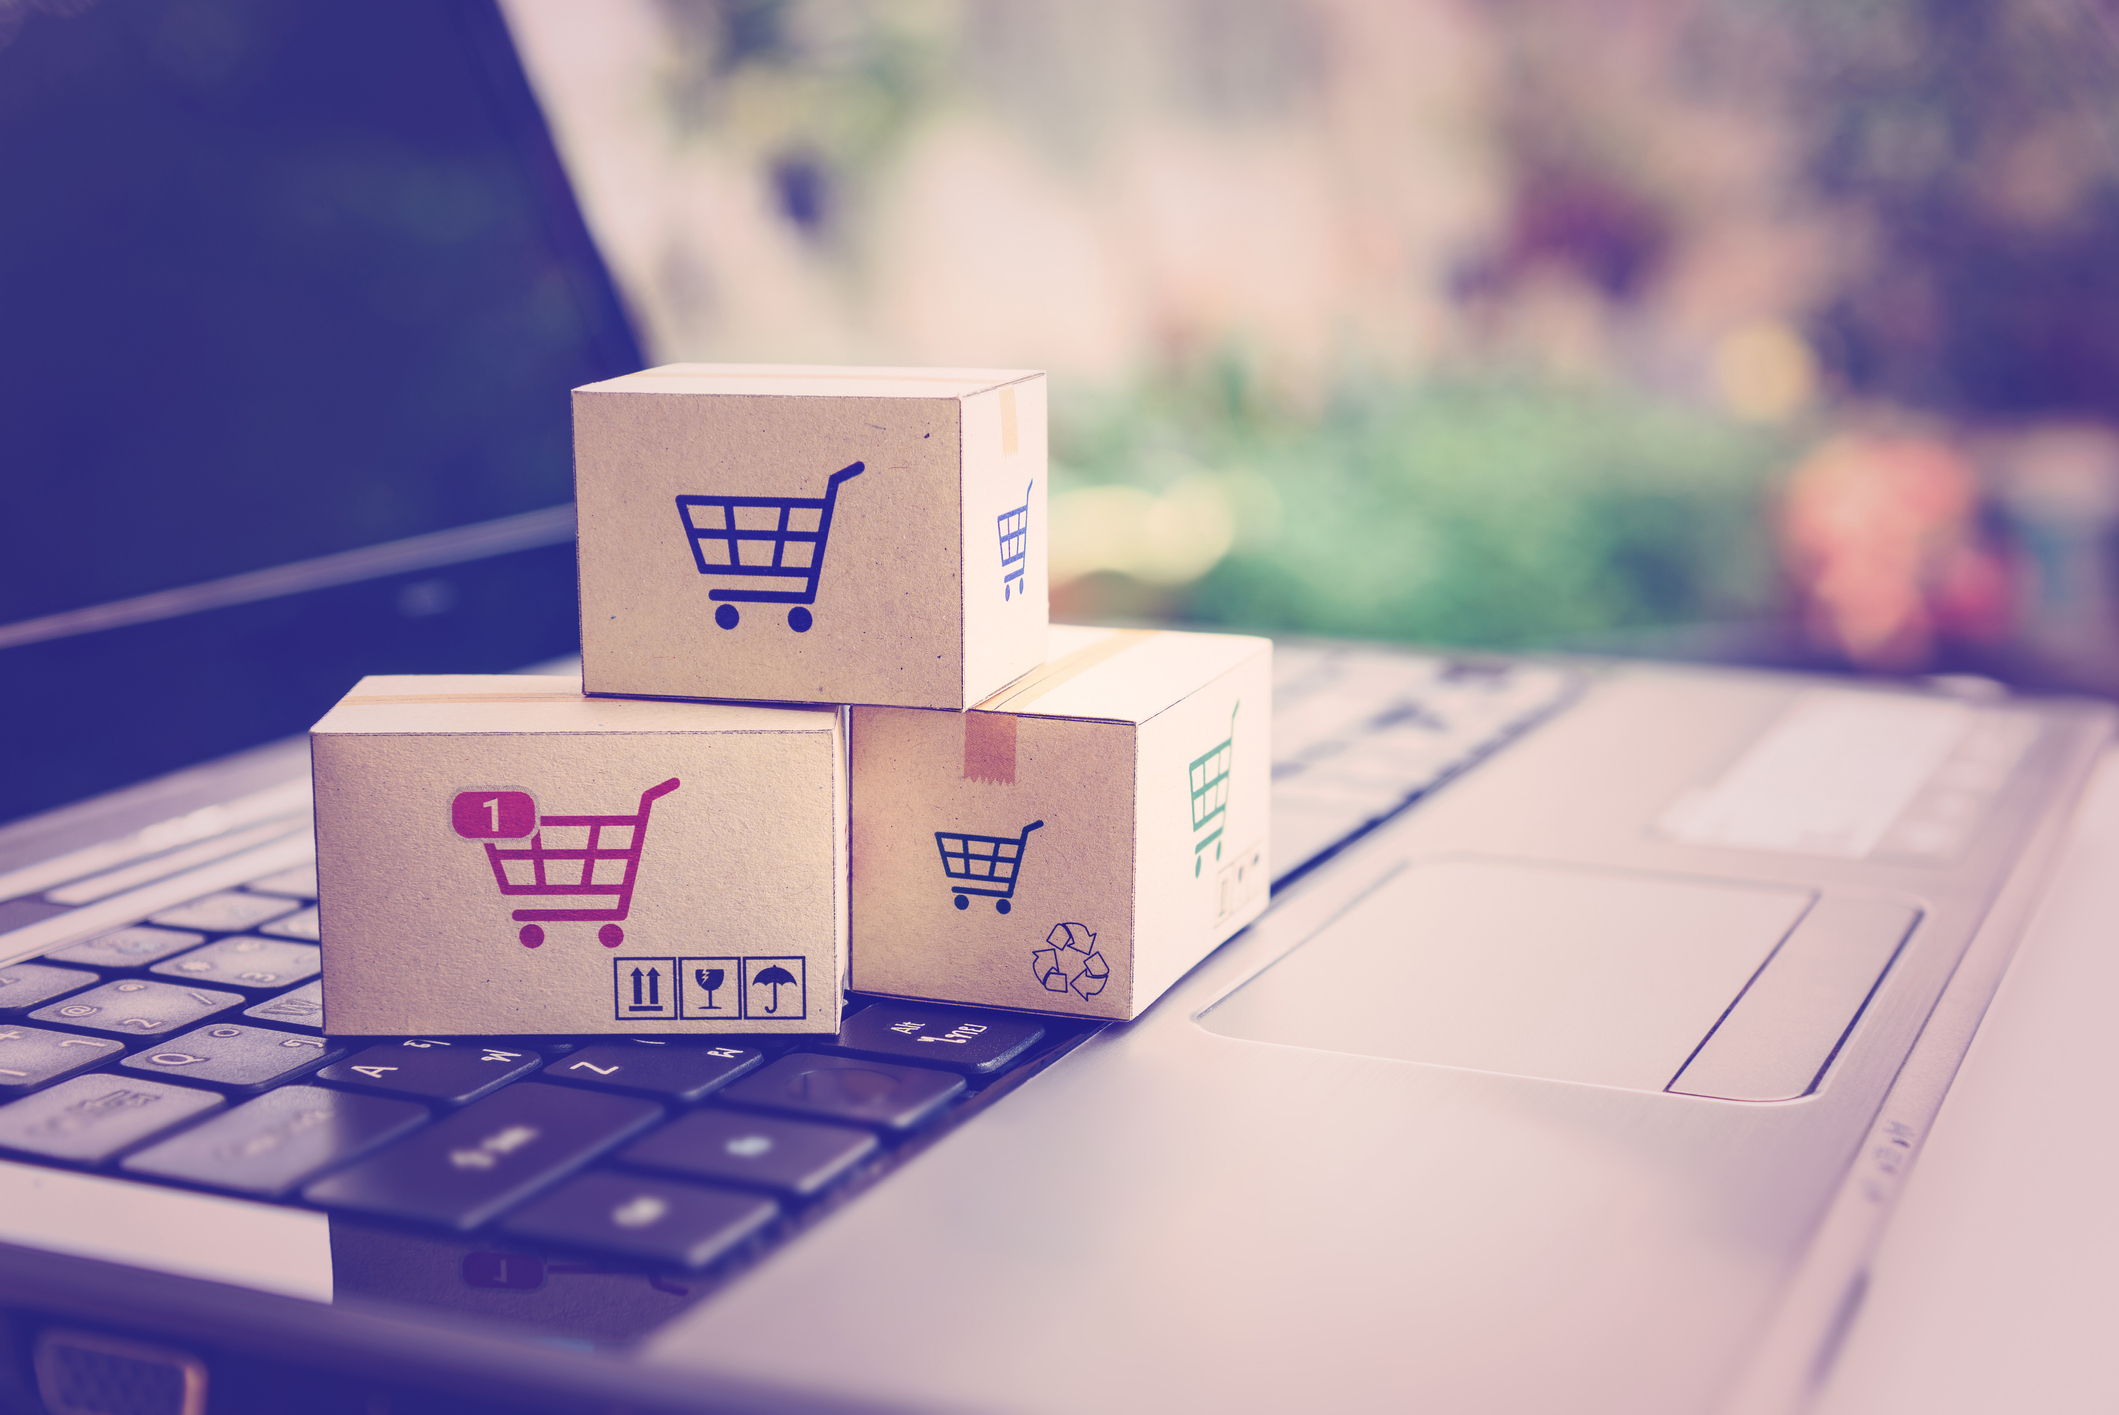 Paper cartons with a shopping cart or trolley logo on a laptop keyboard. Conveys the idea of customers ordering from retailer sites via the internet.